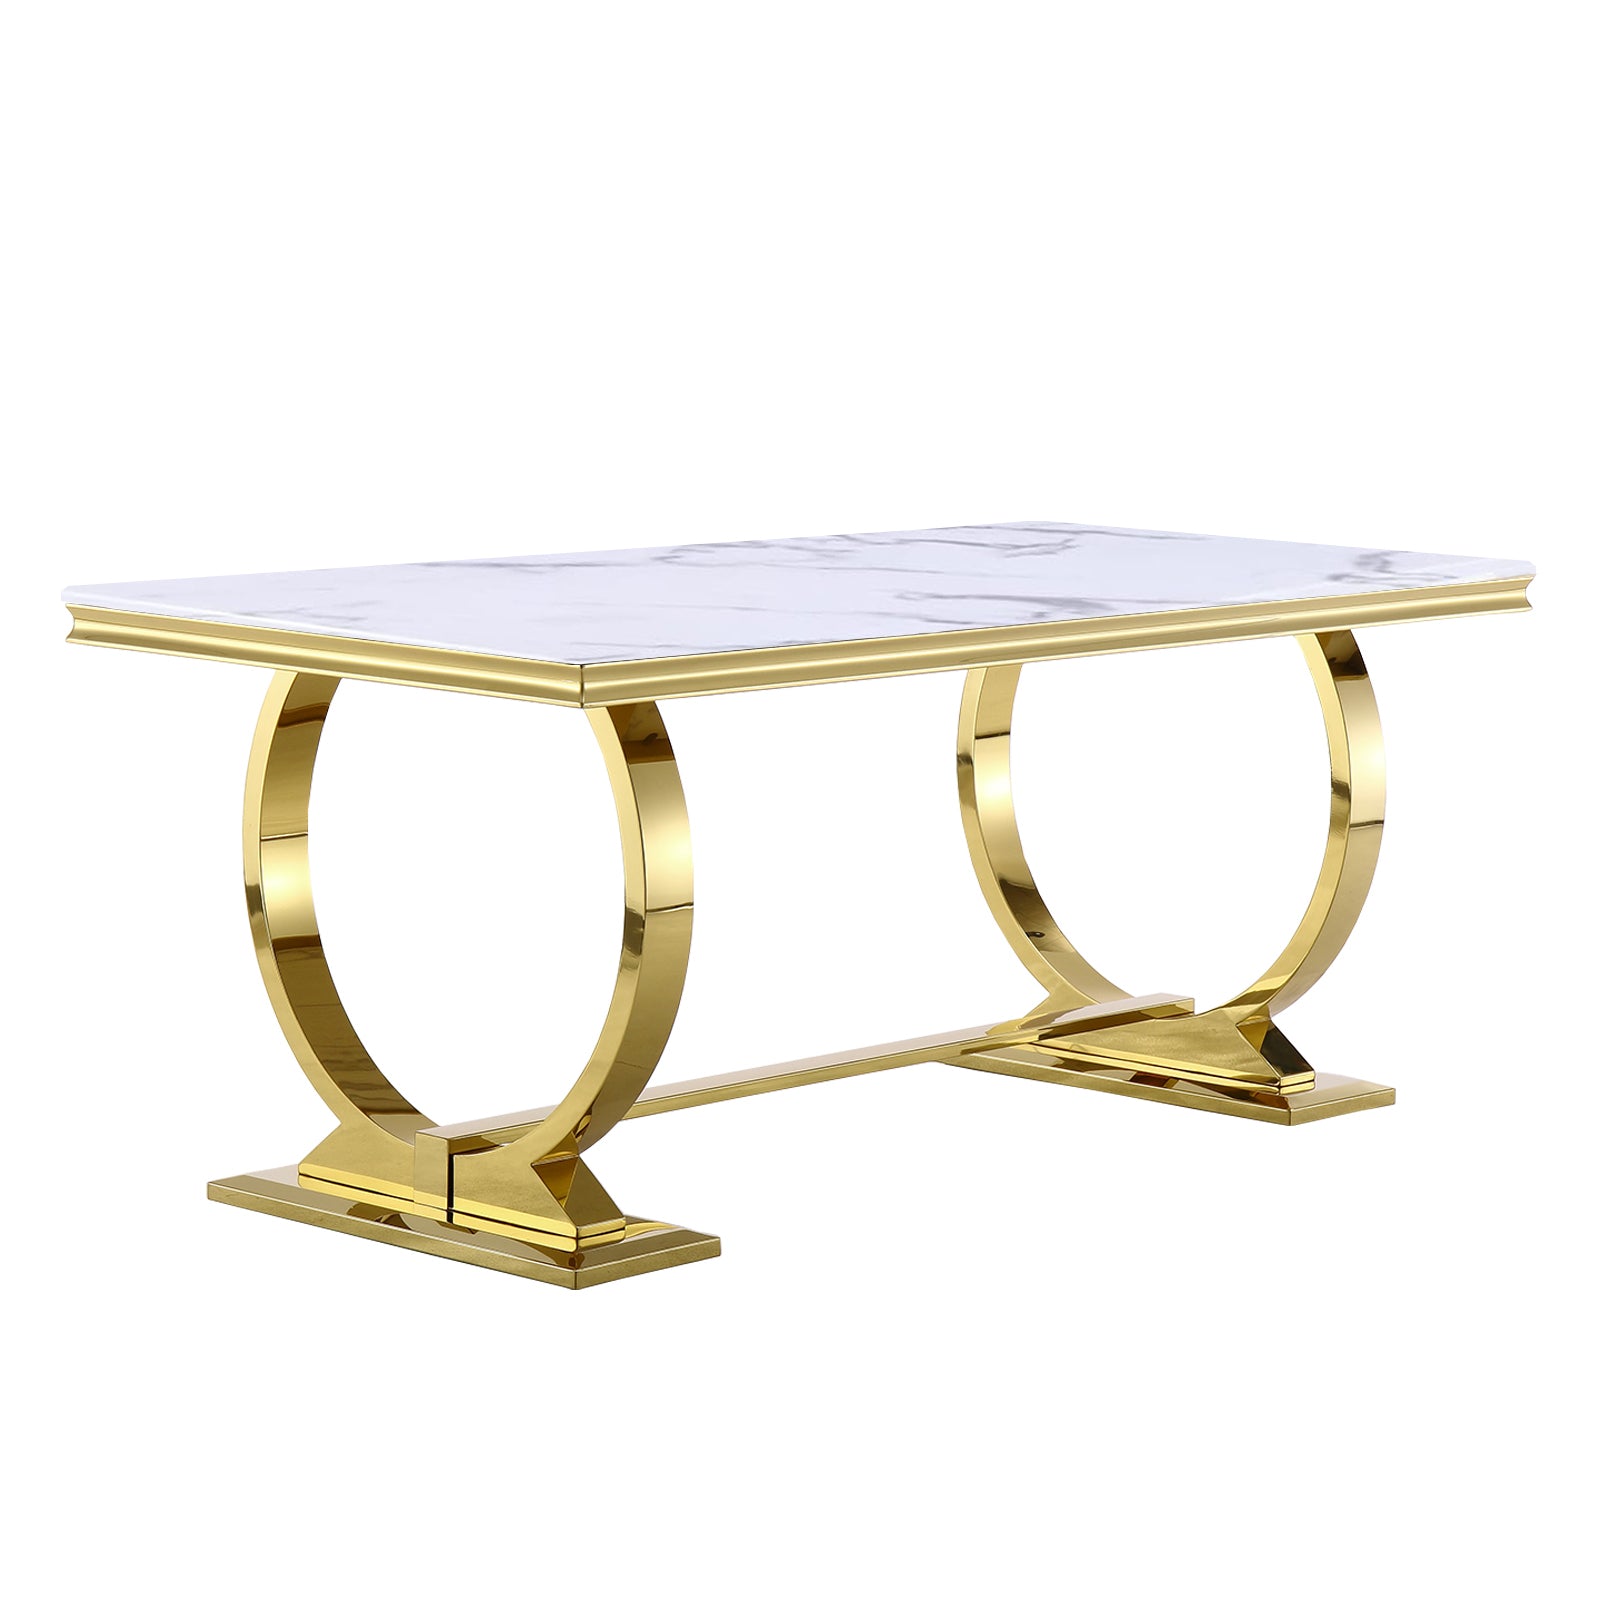 613-Set | AUZ White and Gold Dining room Sets for 6